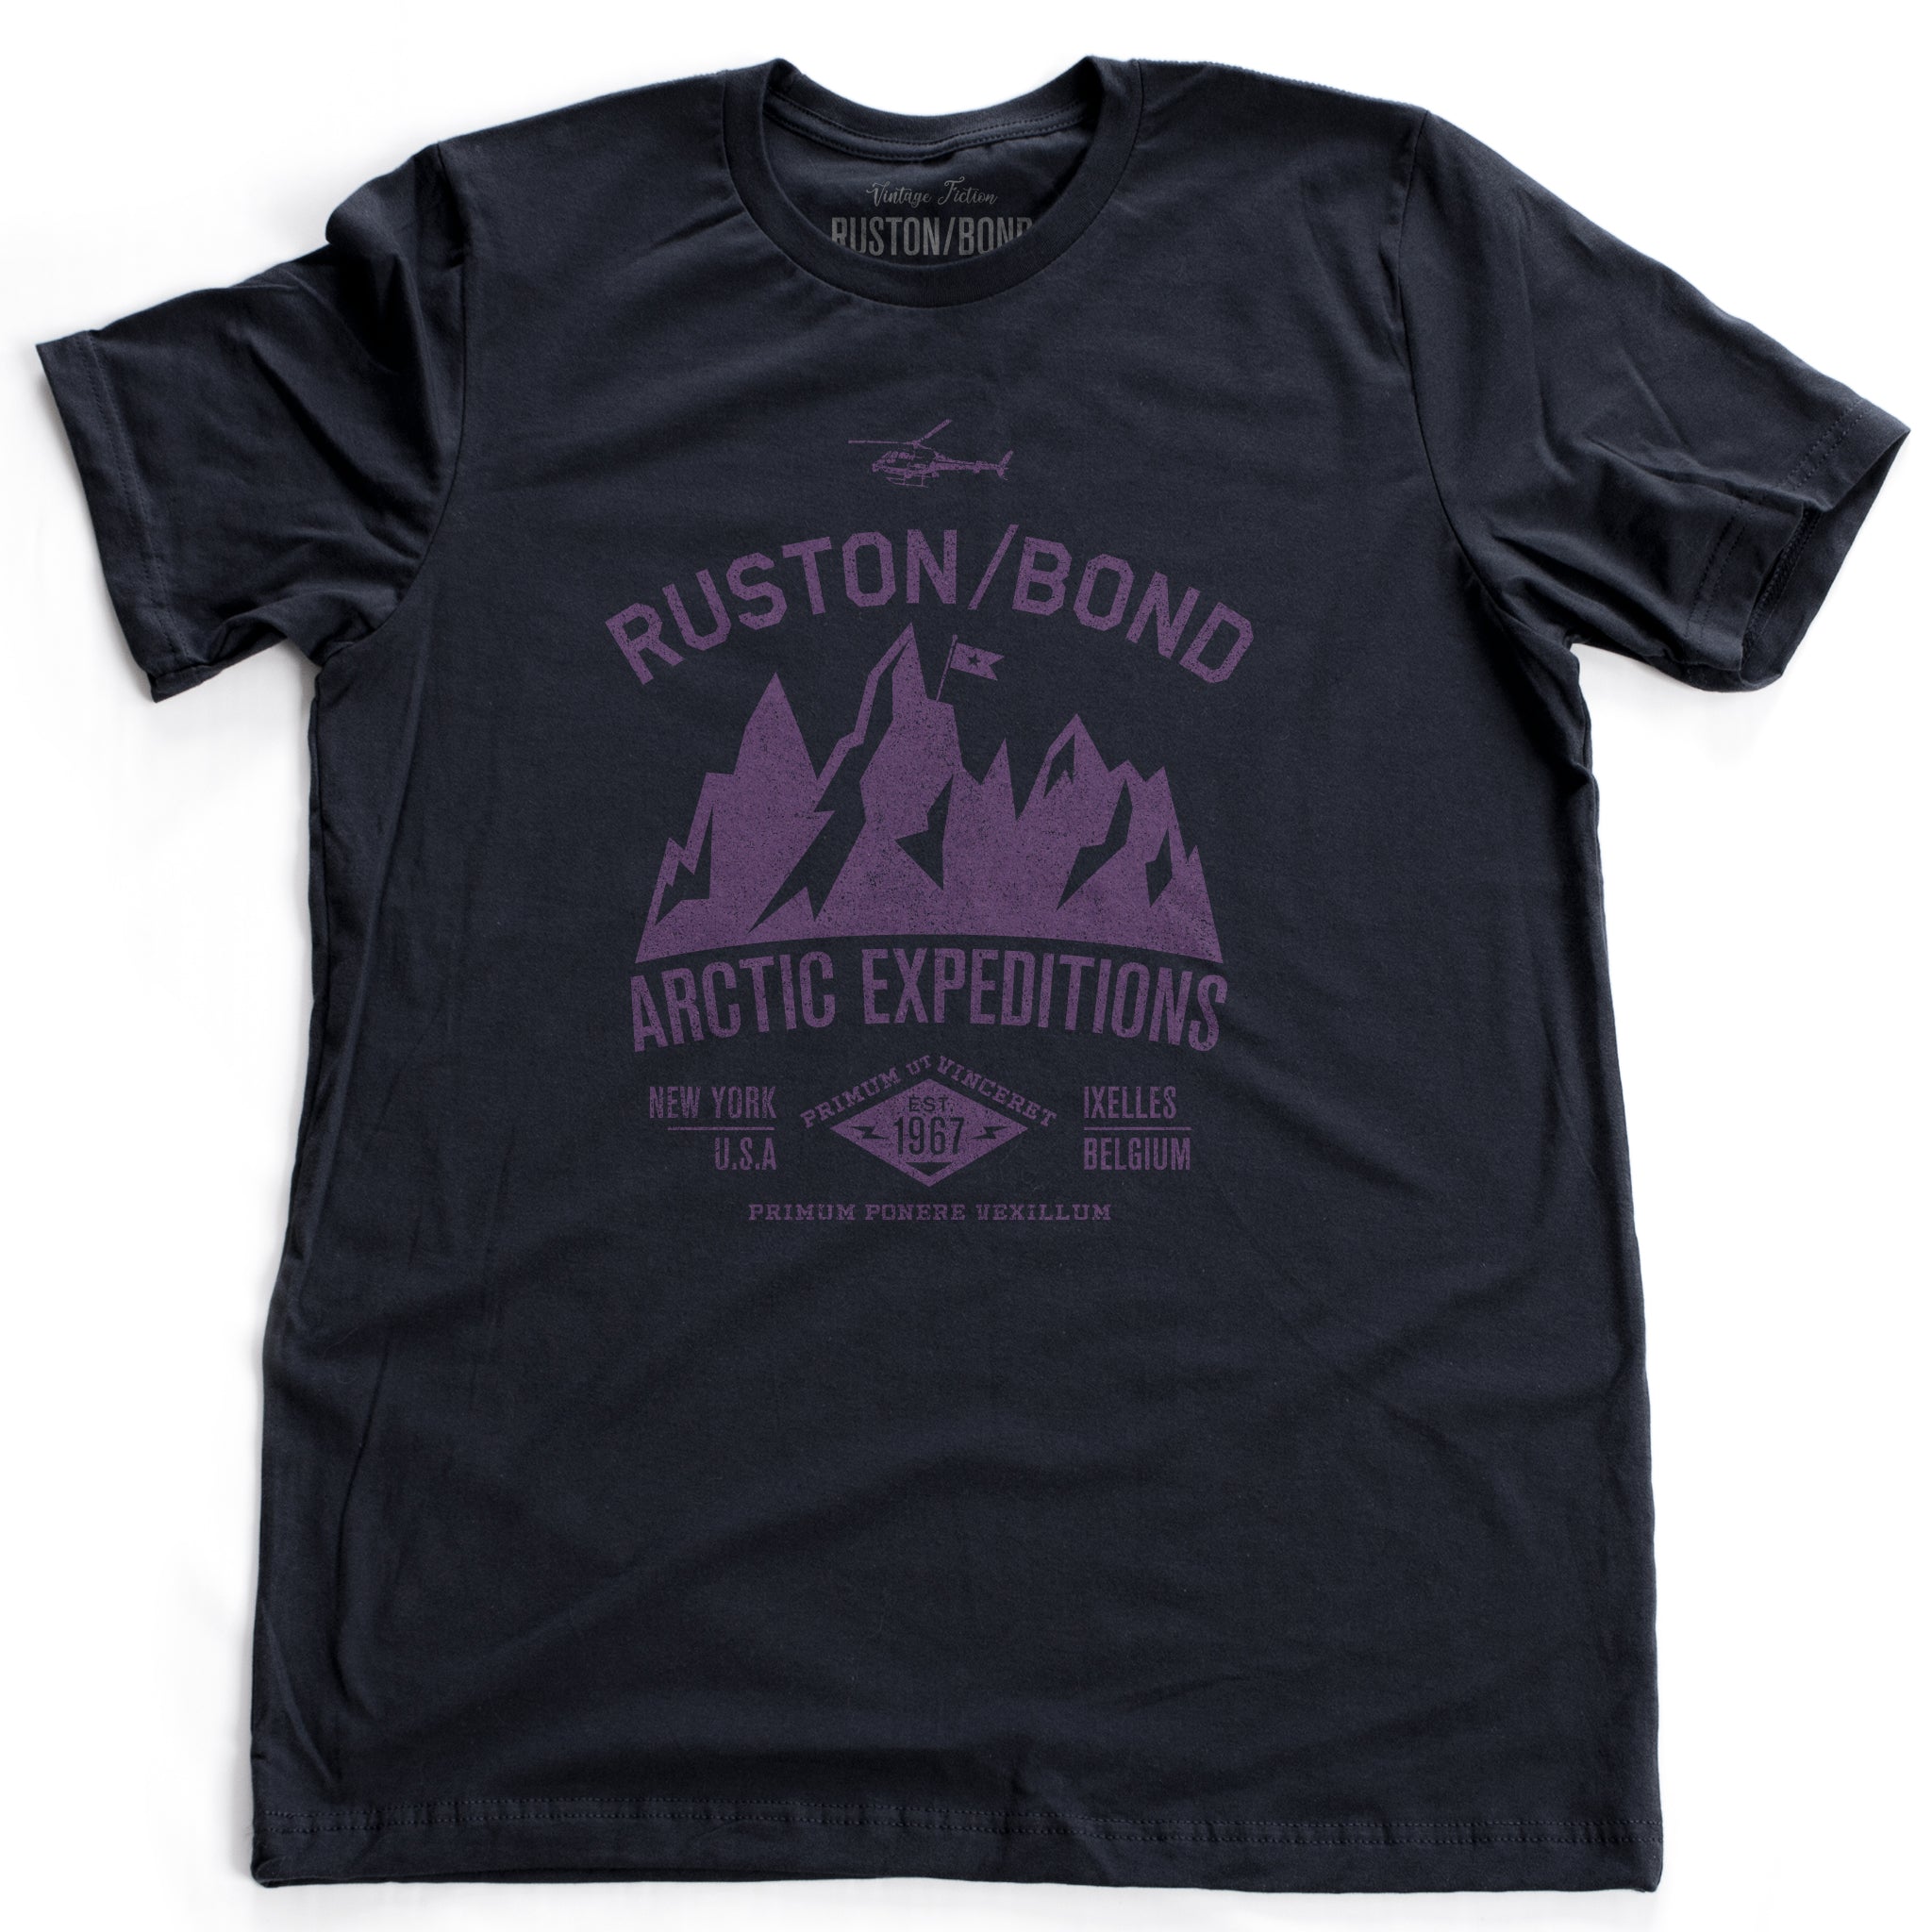 Navy Blue  classic, fashion, retro inspired t-shirt, with a fictional advertisement for an adventure company called Ruston/Bond Arctic Expeditions. It shows a mountain range and a helicopter, and lists the company locations in New York City and Ixelles, Belgium, and a Latin quote.  Inspired by the films of Wes Anderson. From wolfsaint.net